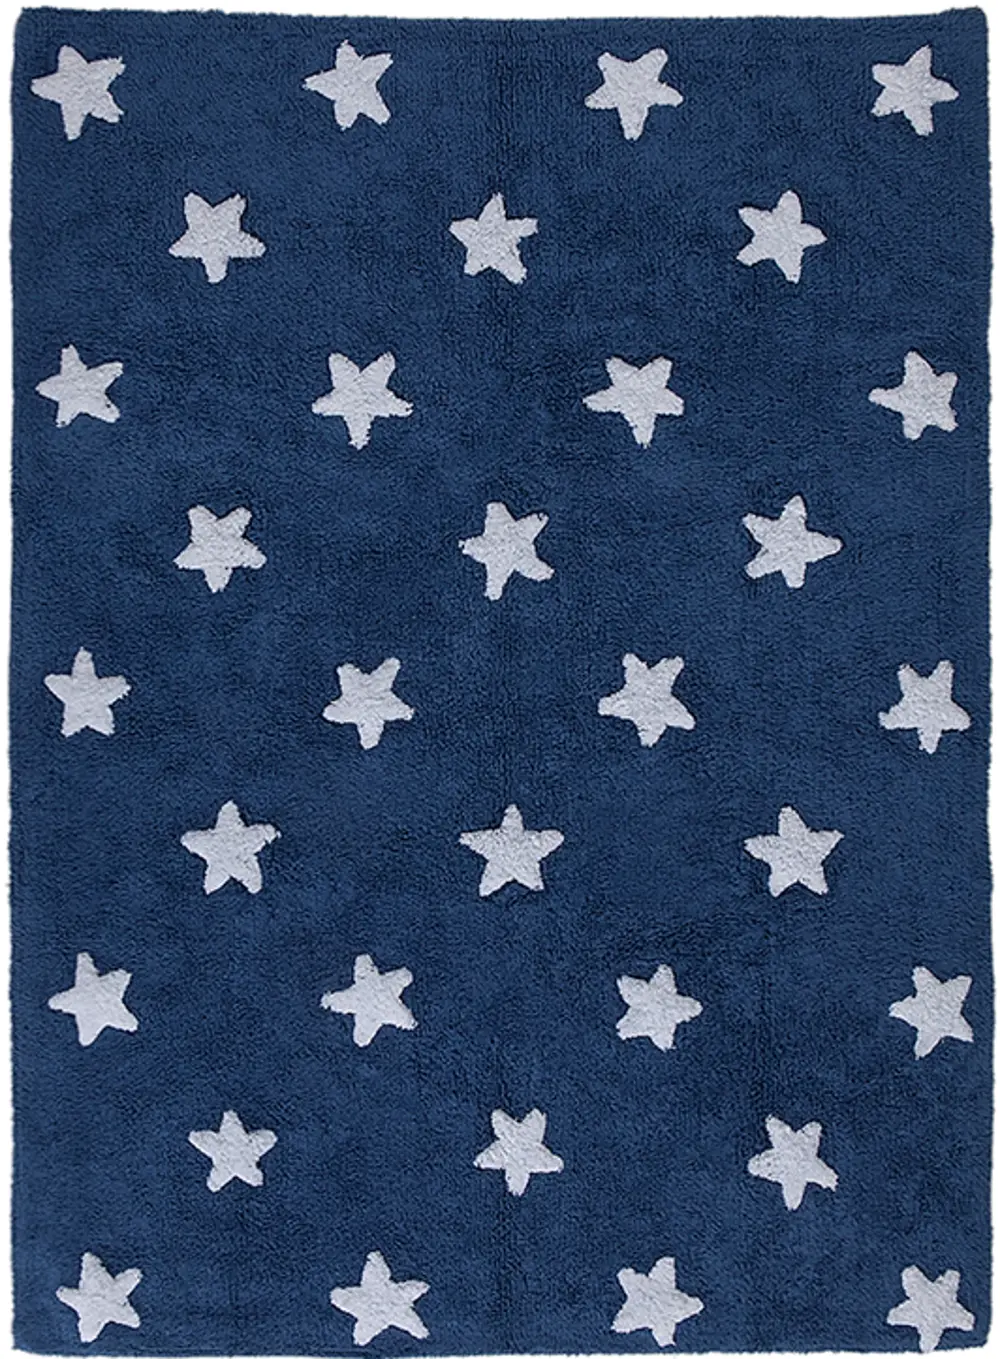 C-M-SW 4 x 5 Small Navy Blue and White Stars Washable Rug-1